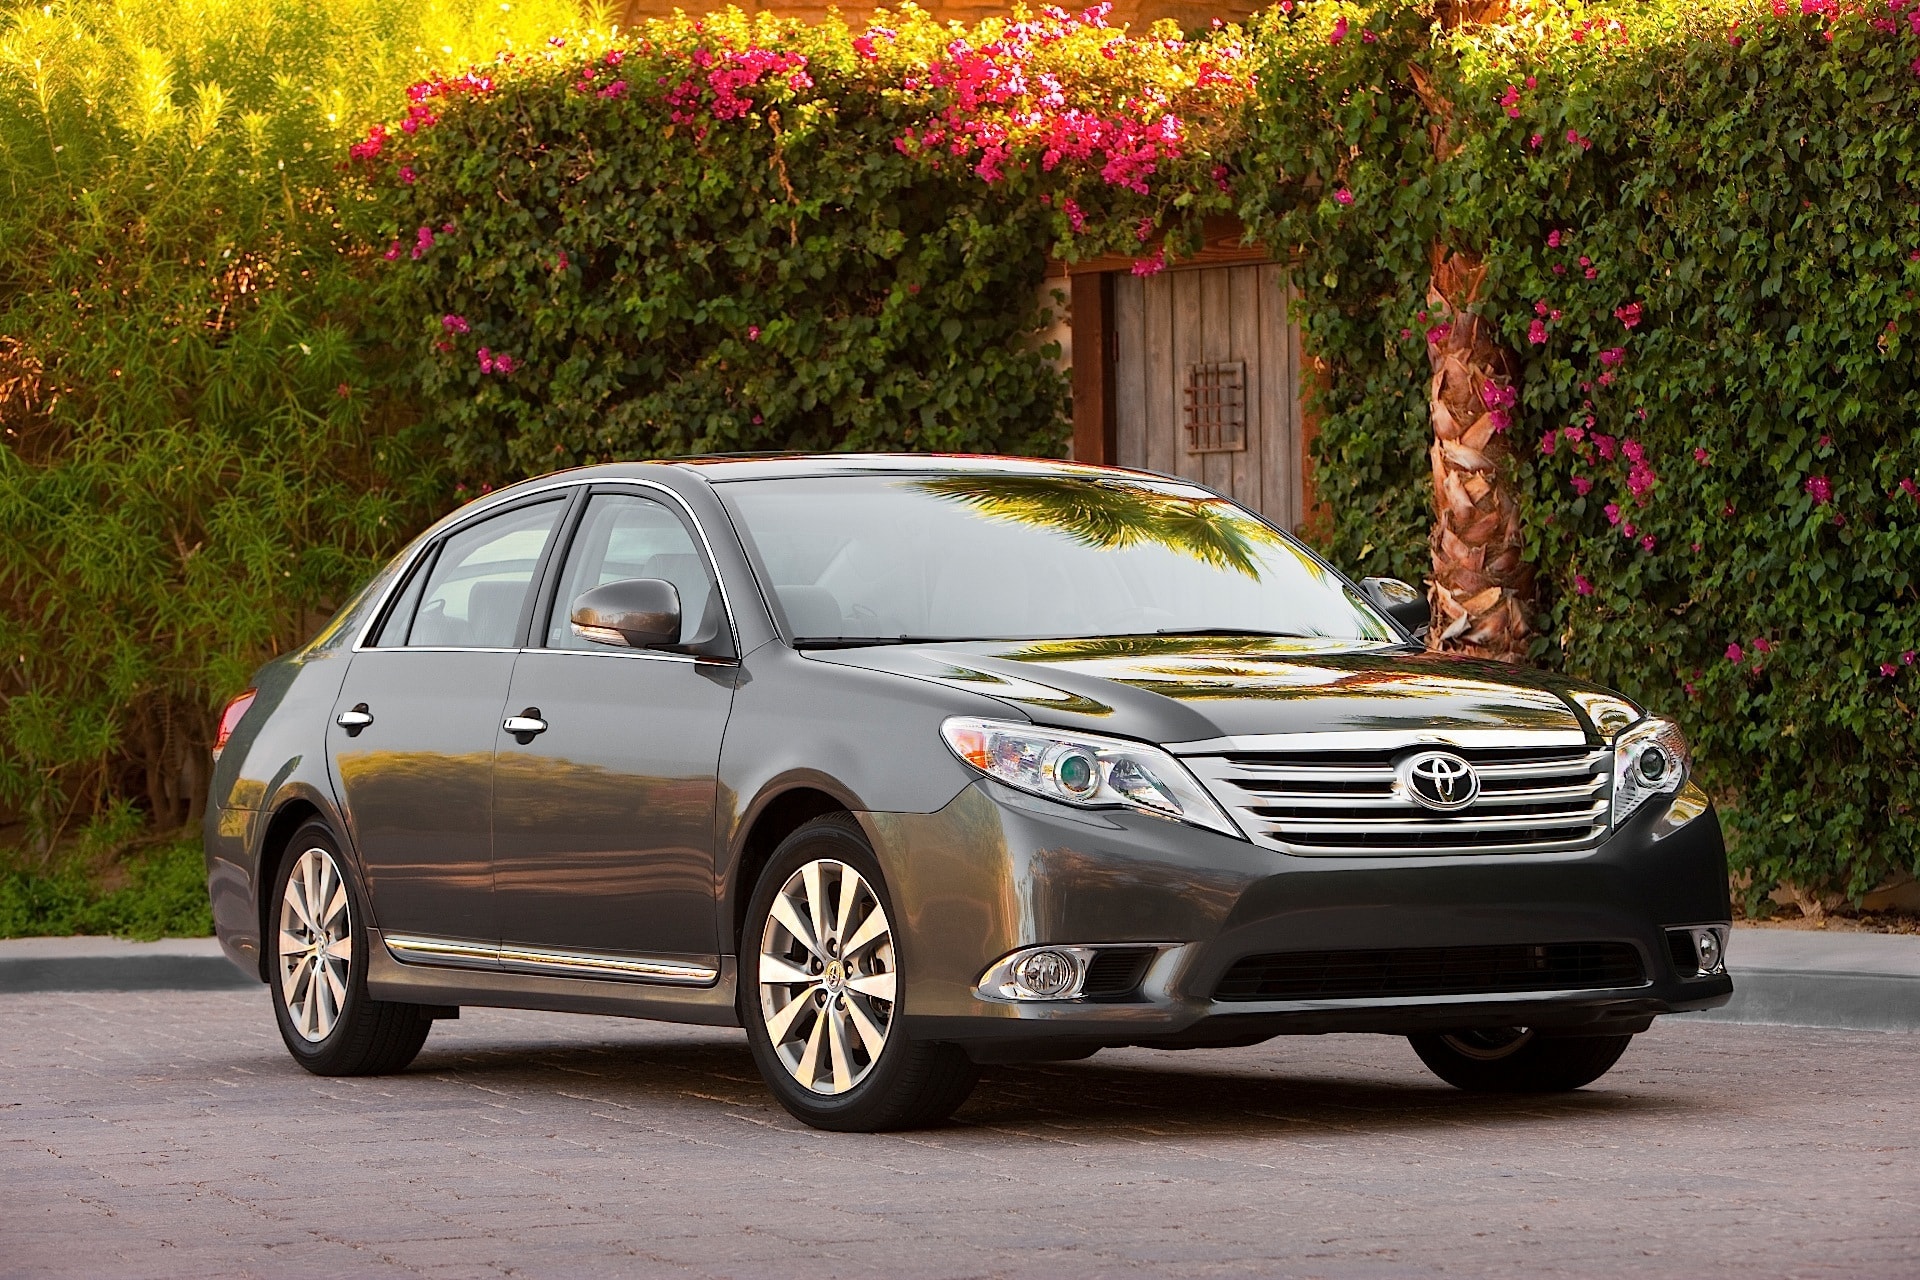 This Popular Auto Mechanic Says the 2007 Toyota Avalon Is One of